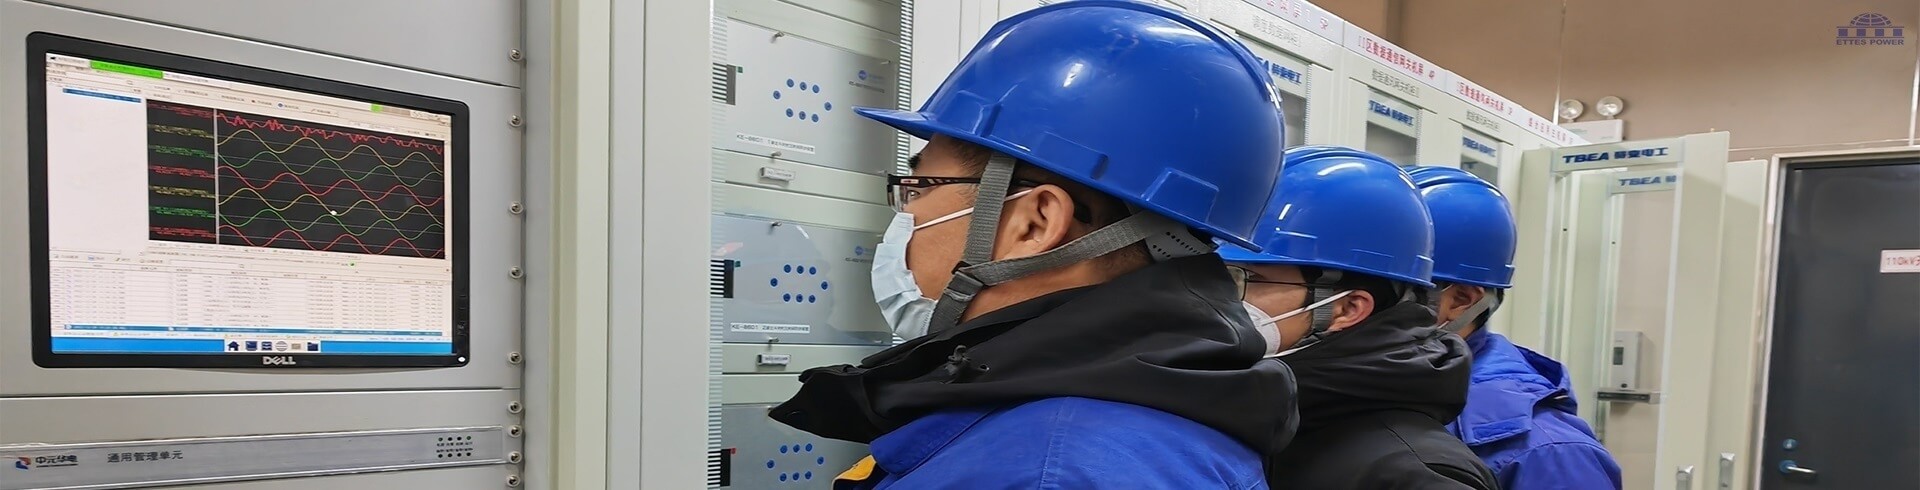 Maintenance and inspection for gas generator & CHP power plant ETTES POWER